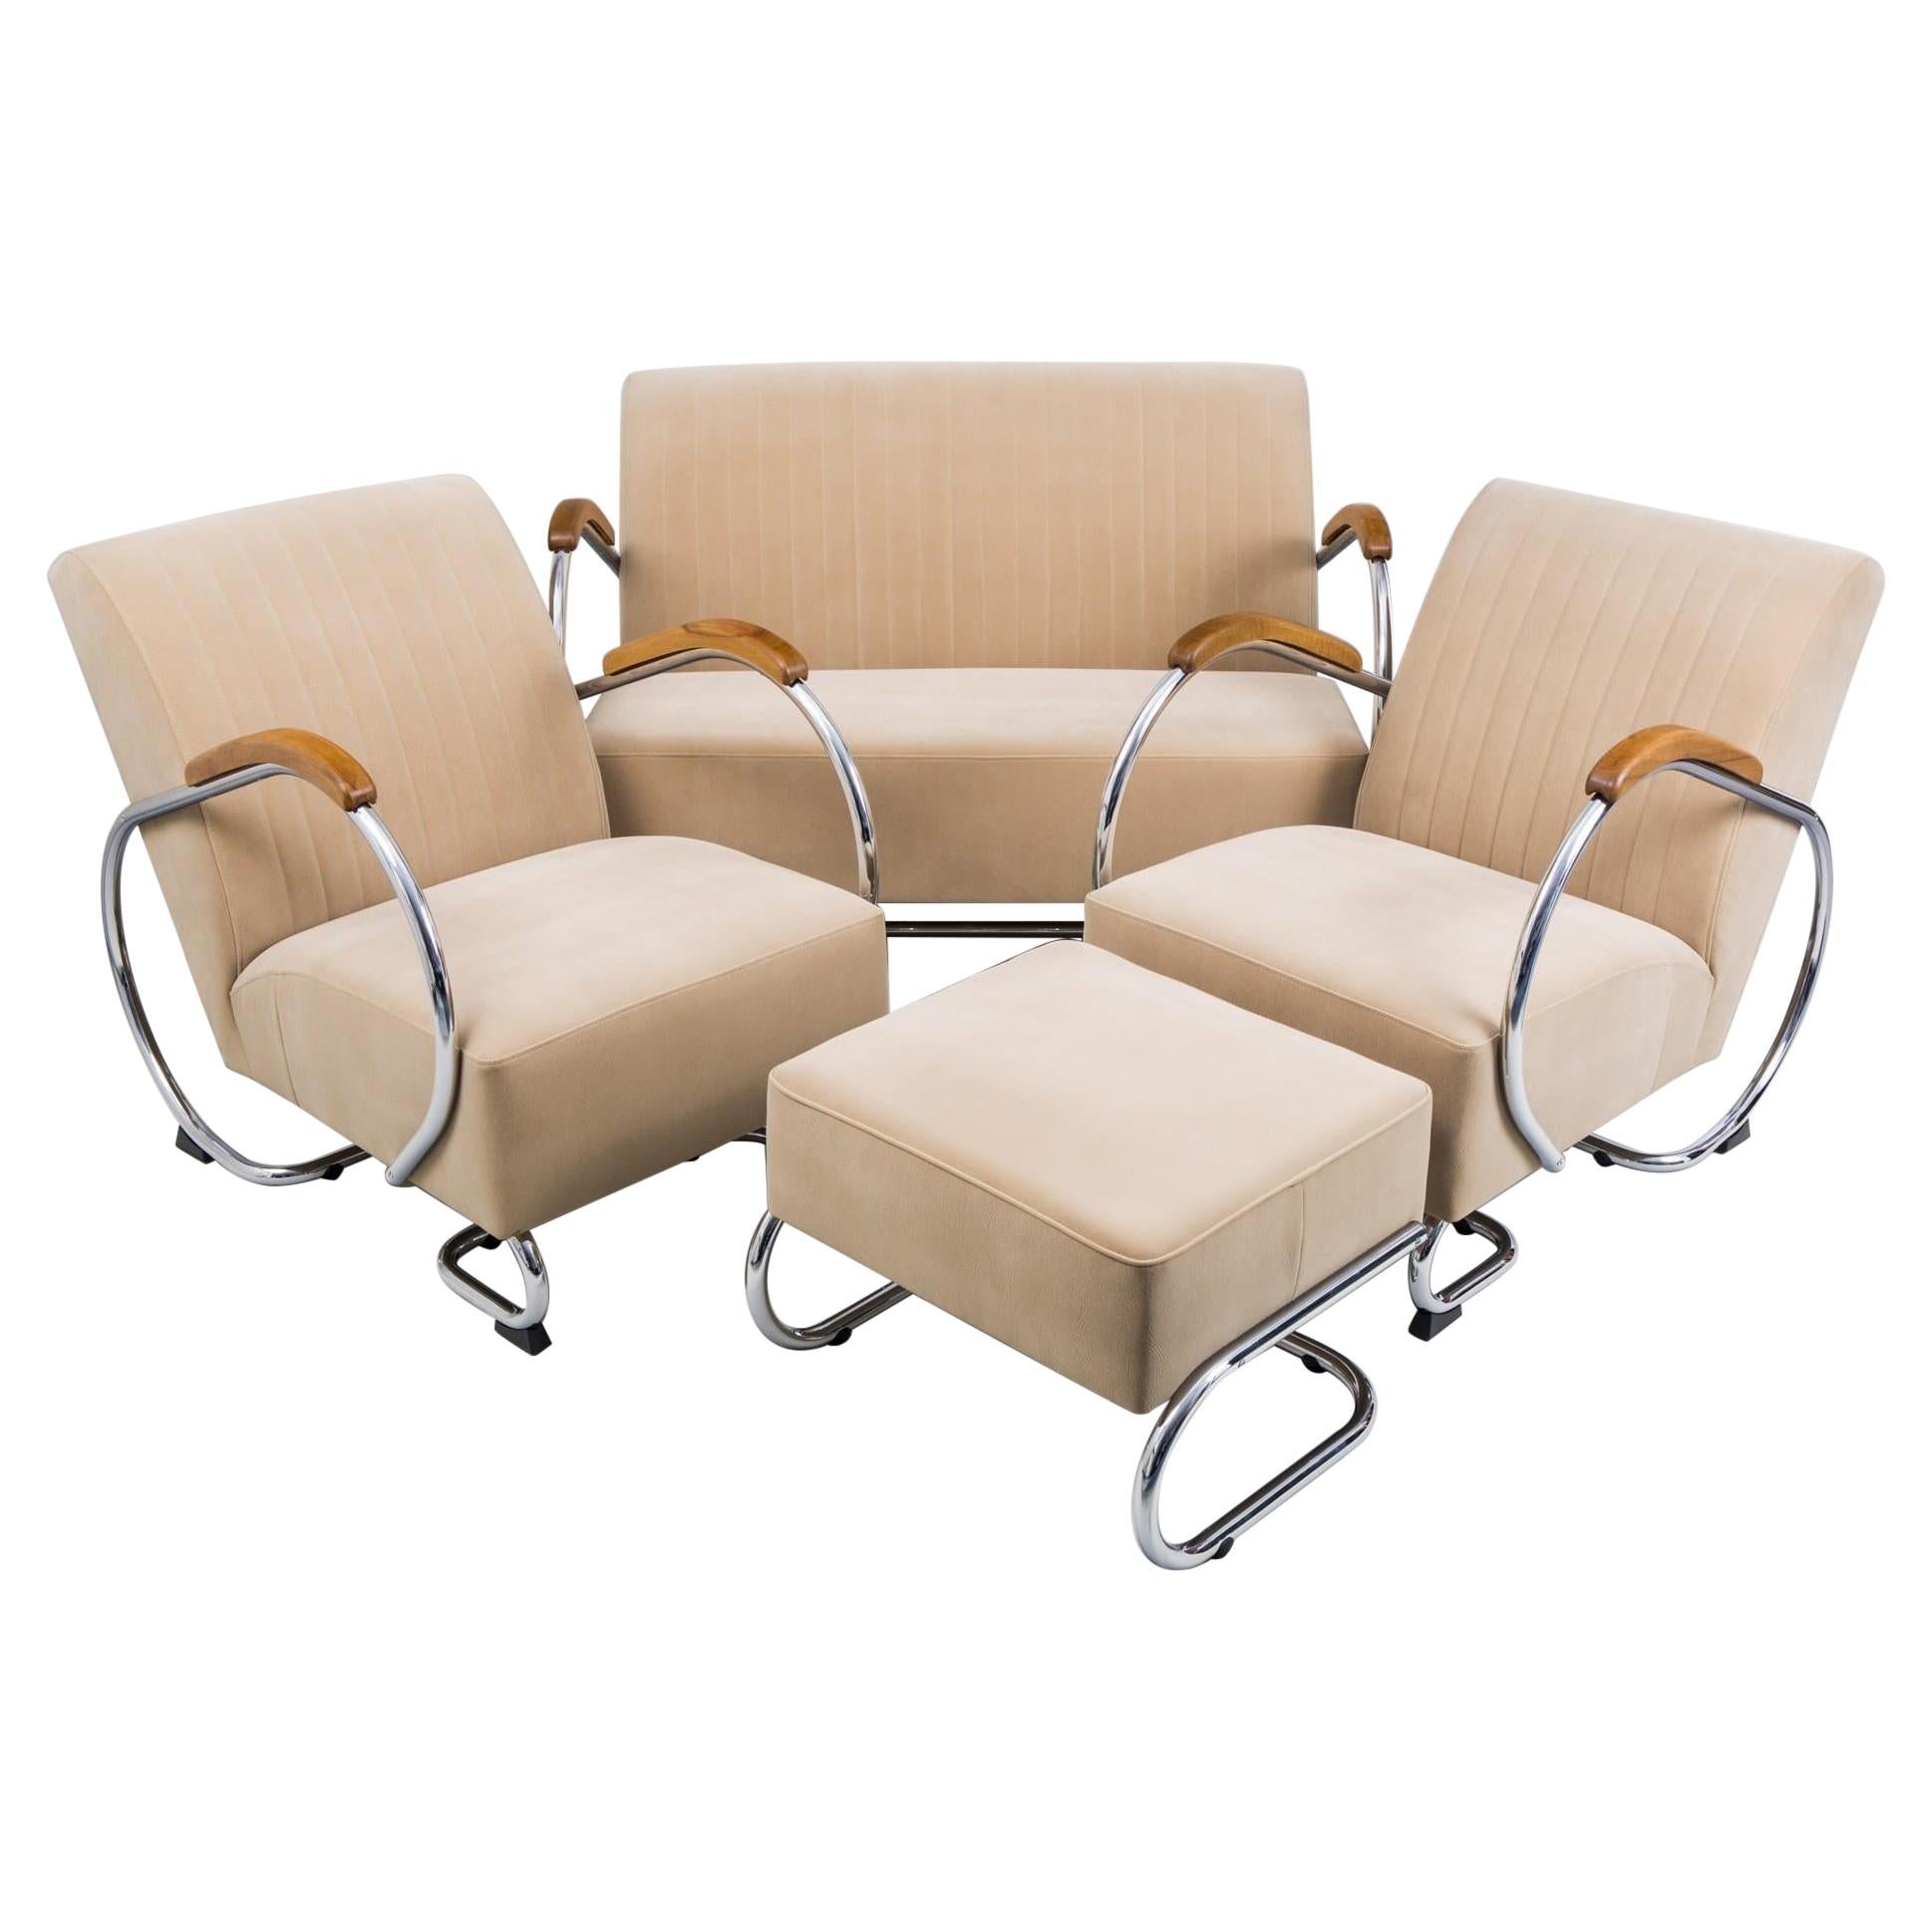 Fully Restored Chrome 1960s Seating Set Made by Kovona, in Czech Republic